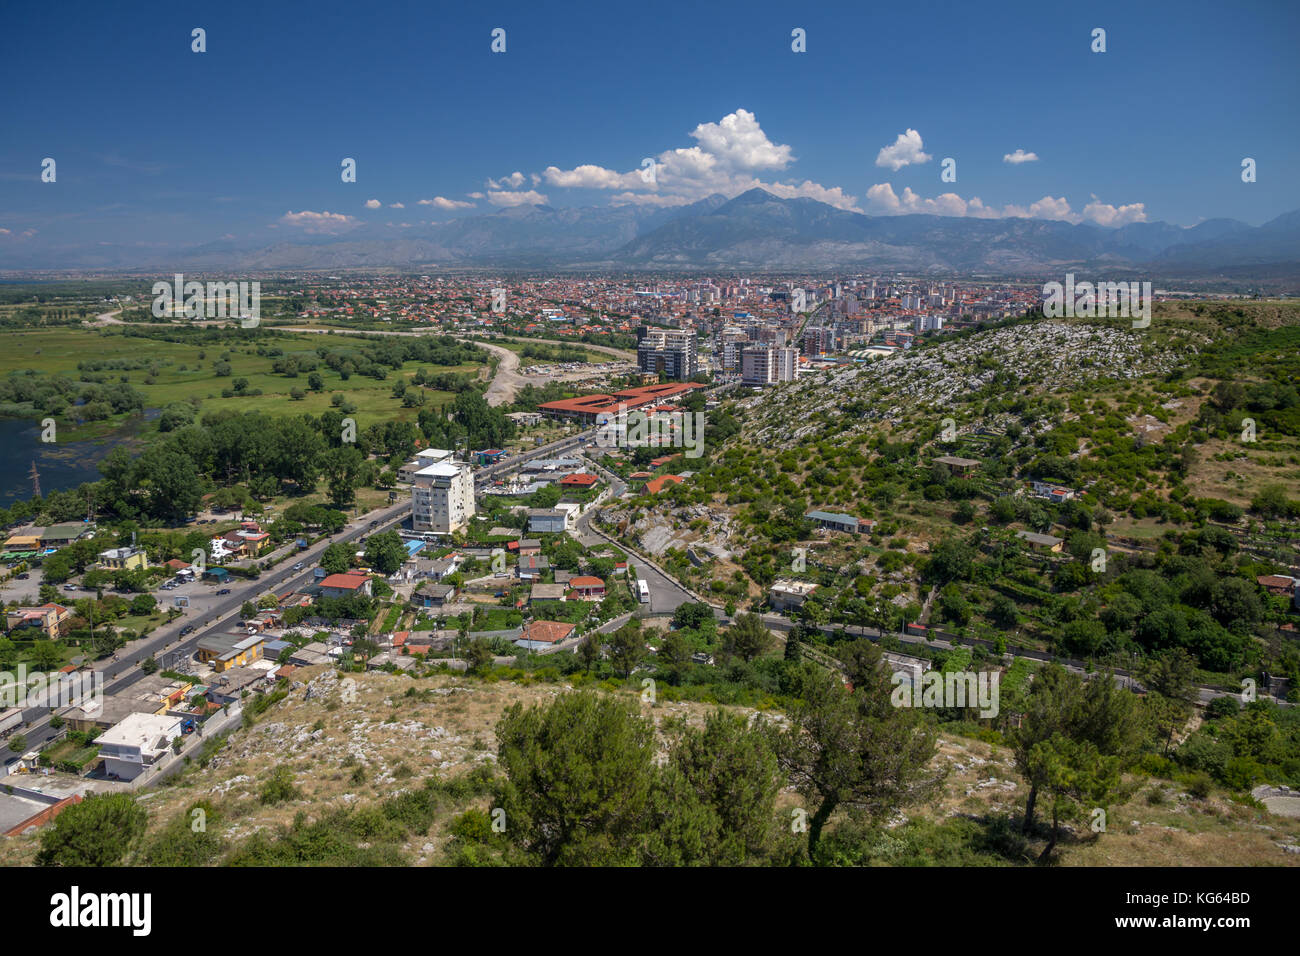 The city of Shkoder, Albania taken from the Rozafa Castle.  A wide main road leads the eye into the town surrounded by grass and trees. Stock Photo